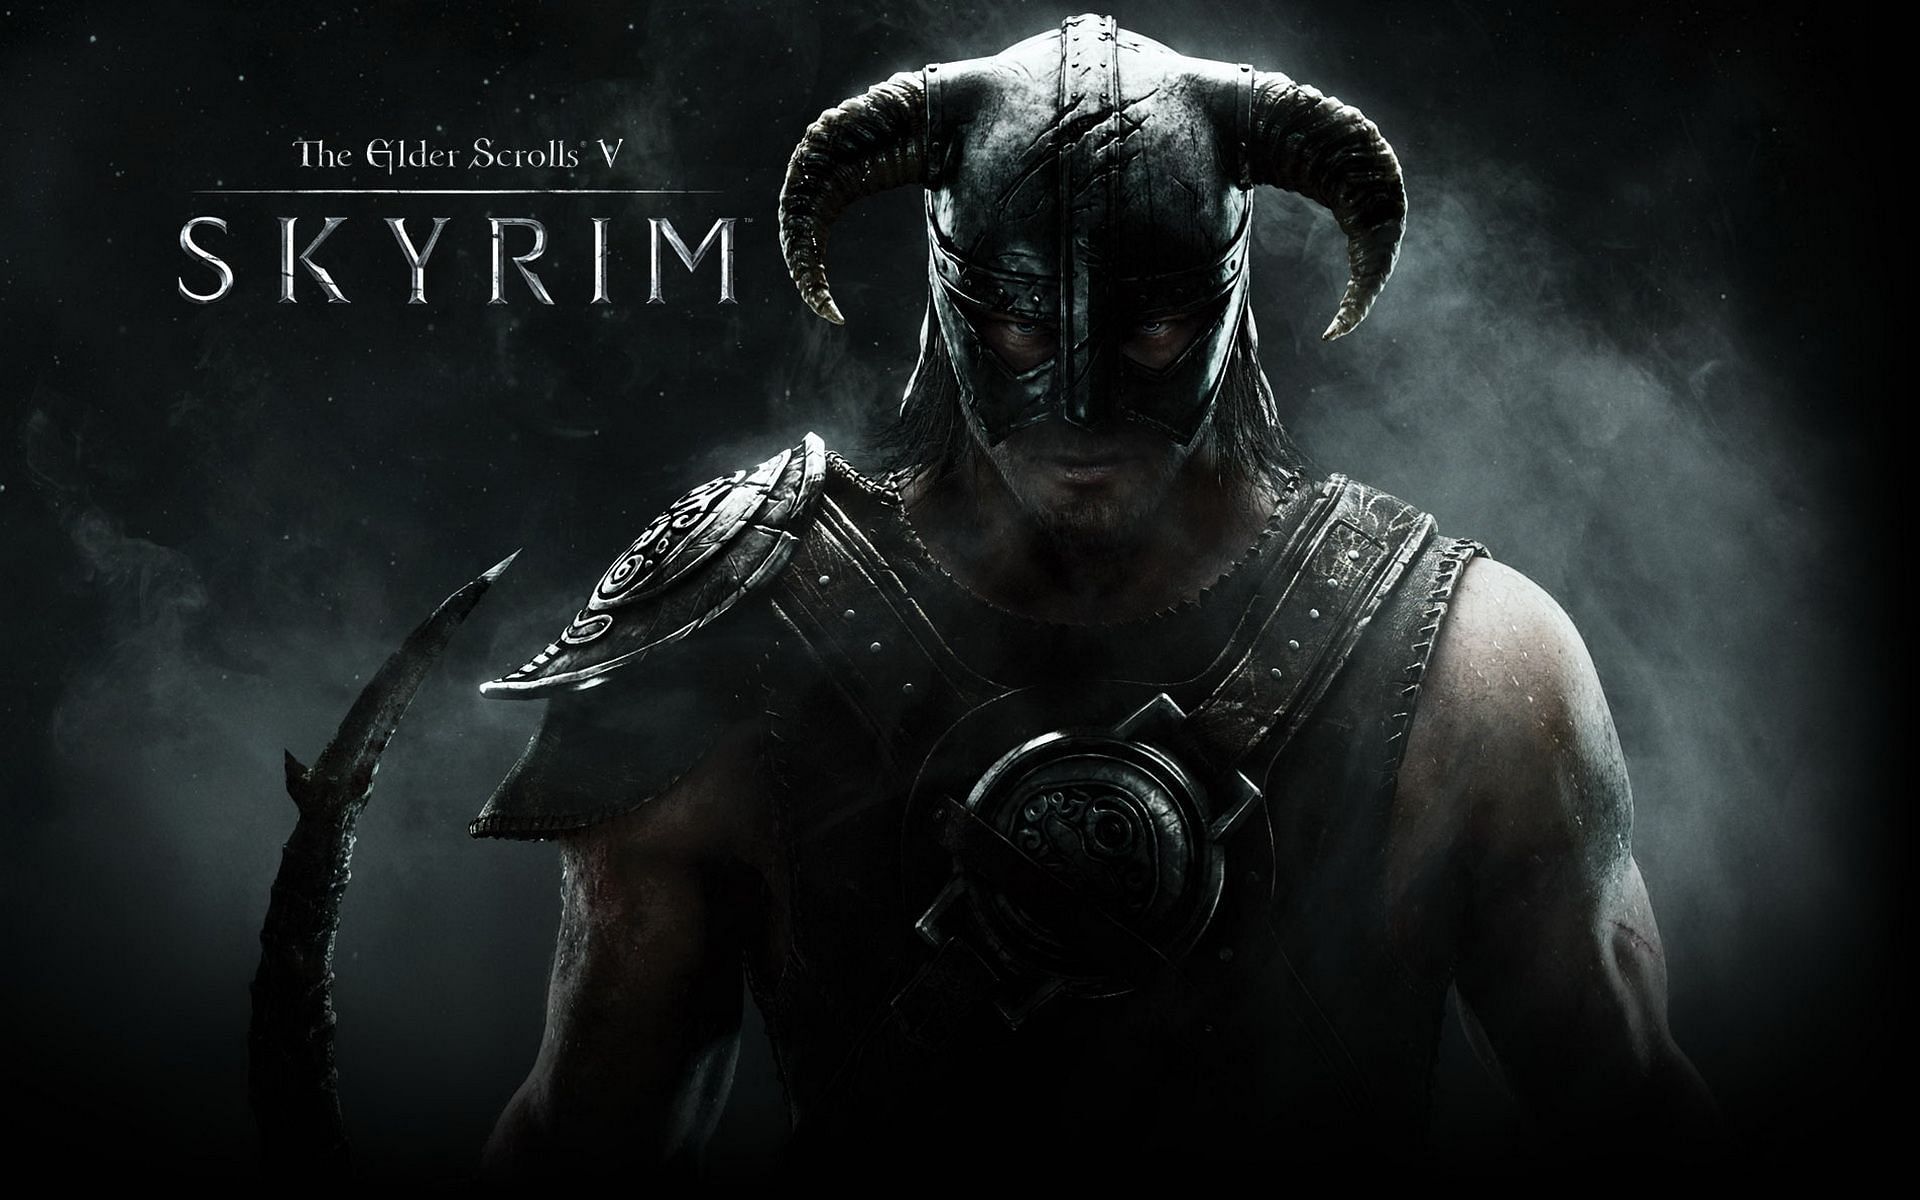 There are loads of fantastical places to visit, mysteries to uncover, and stories and atmospheres to immerse yourself in The Elder Scrolls V: Skyrim Special Edition (Image via Bethesda)